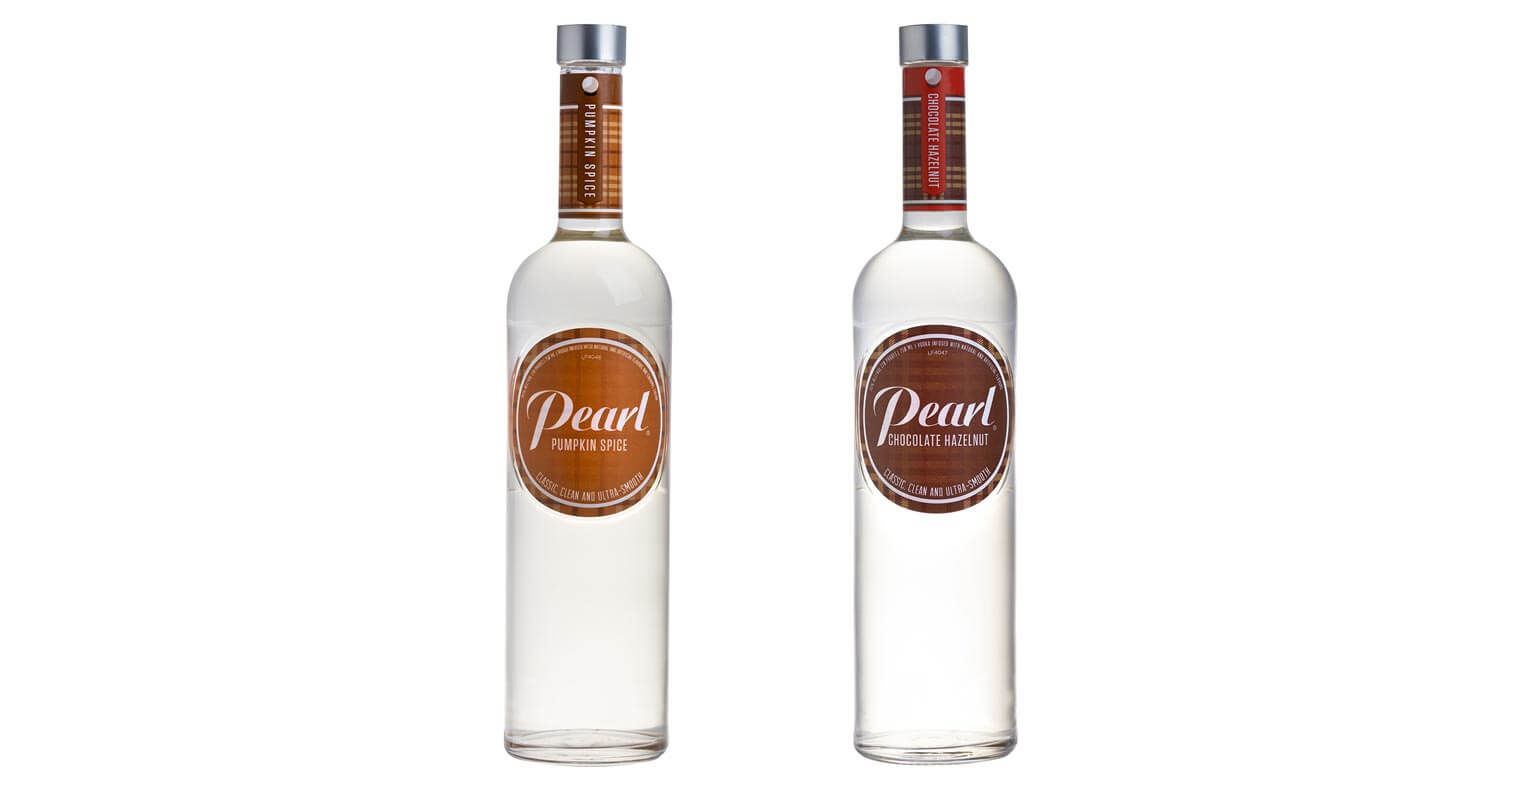 Pearl Vodka Two New Flavors